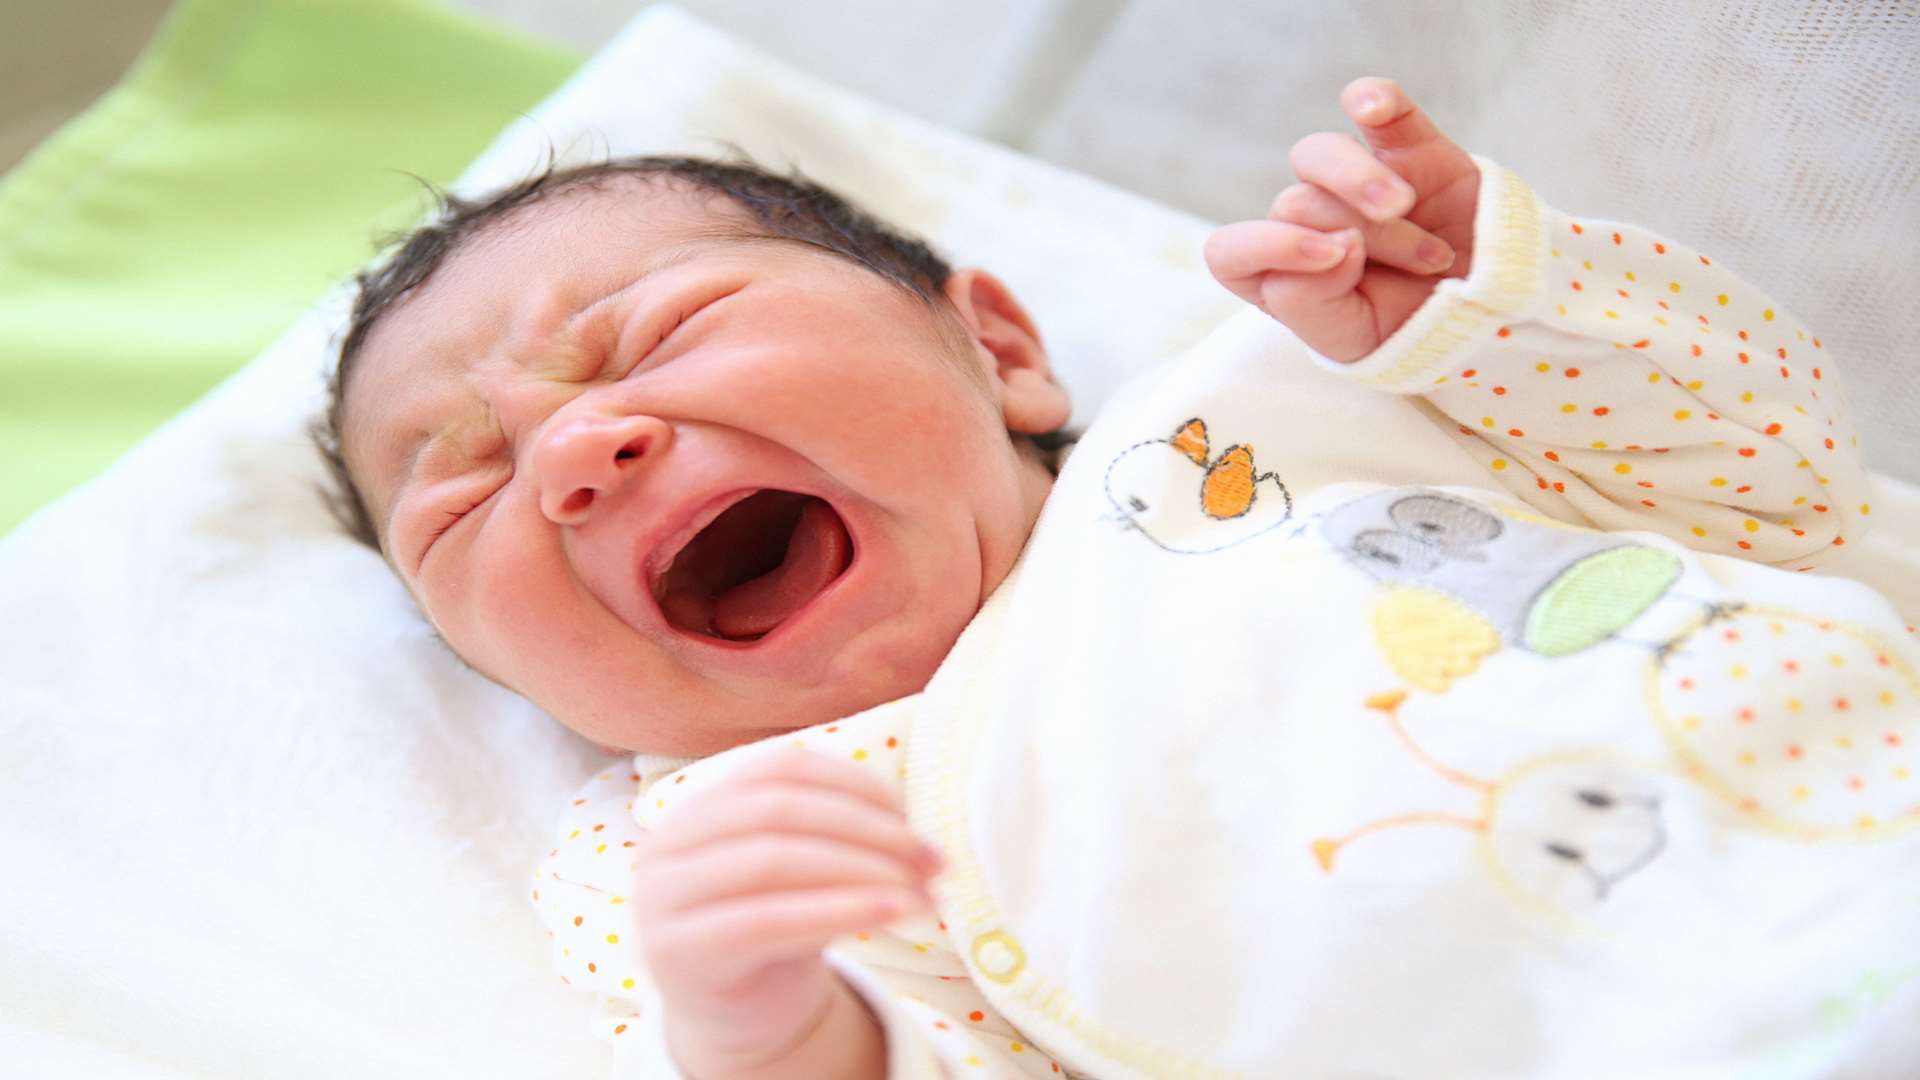 All babies cry and most of the time it's harmless and part of their natural instinct